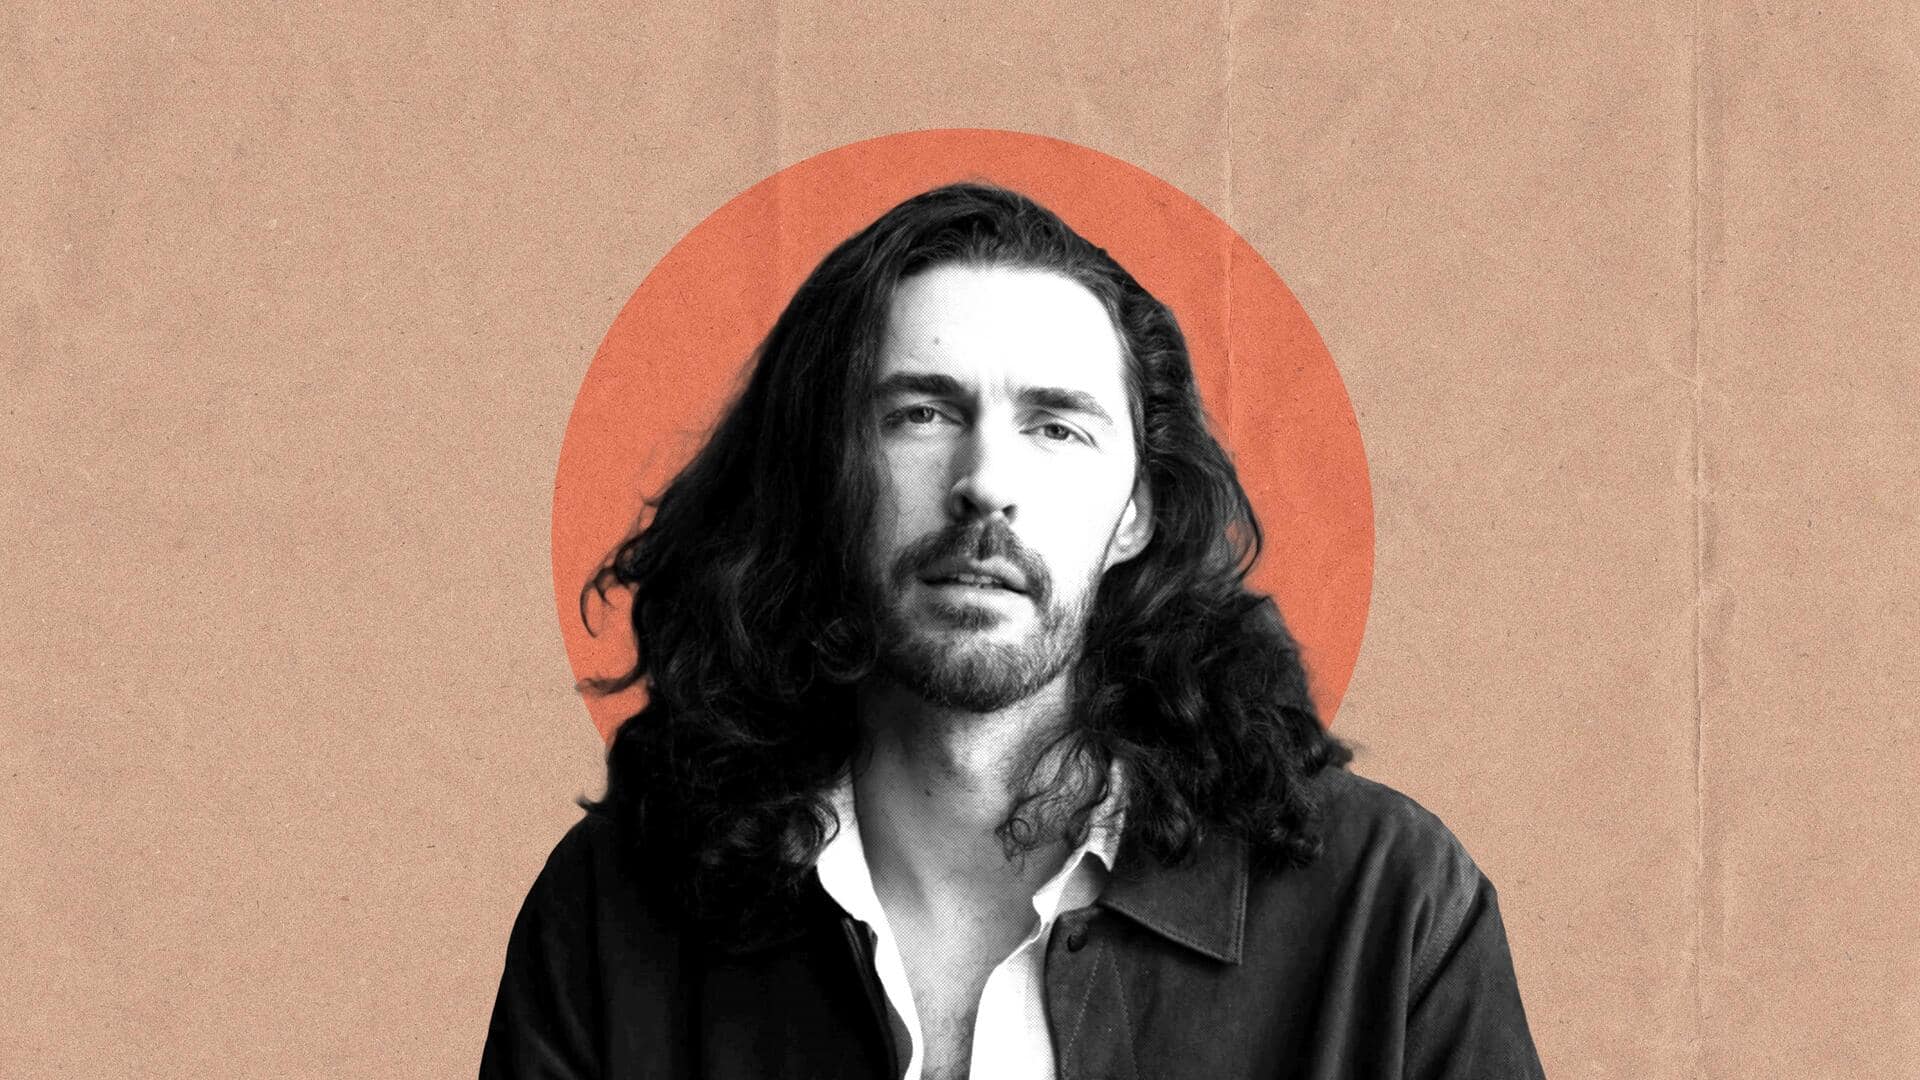 Top 5 Hozier songs that should be on your playlist